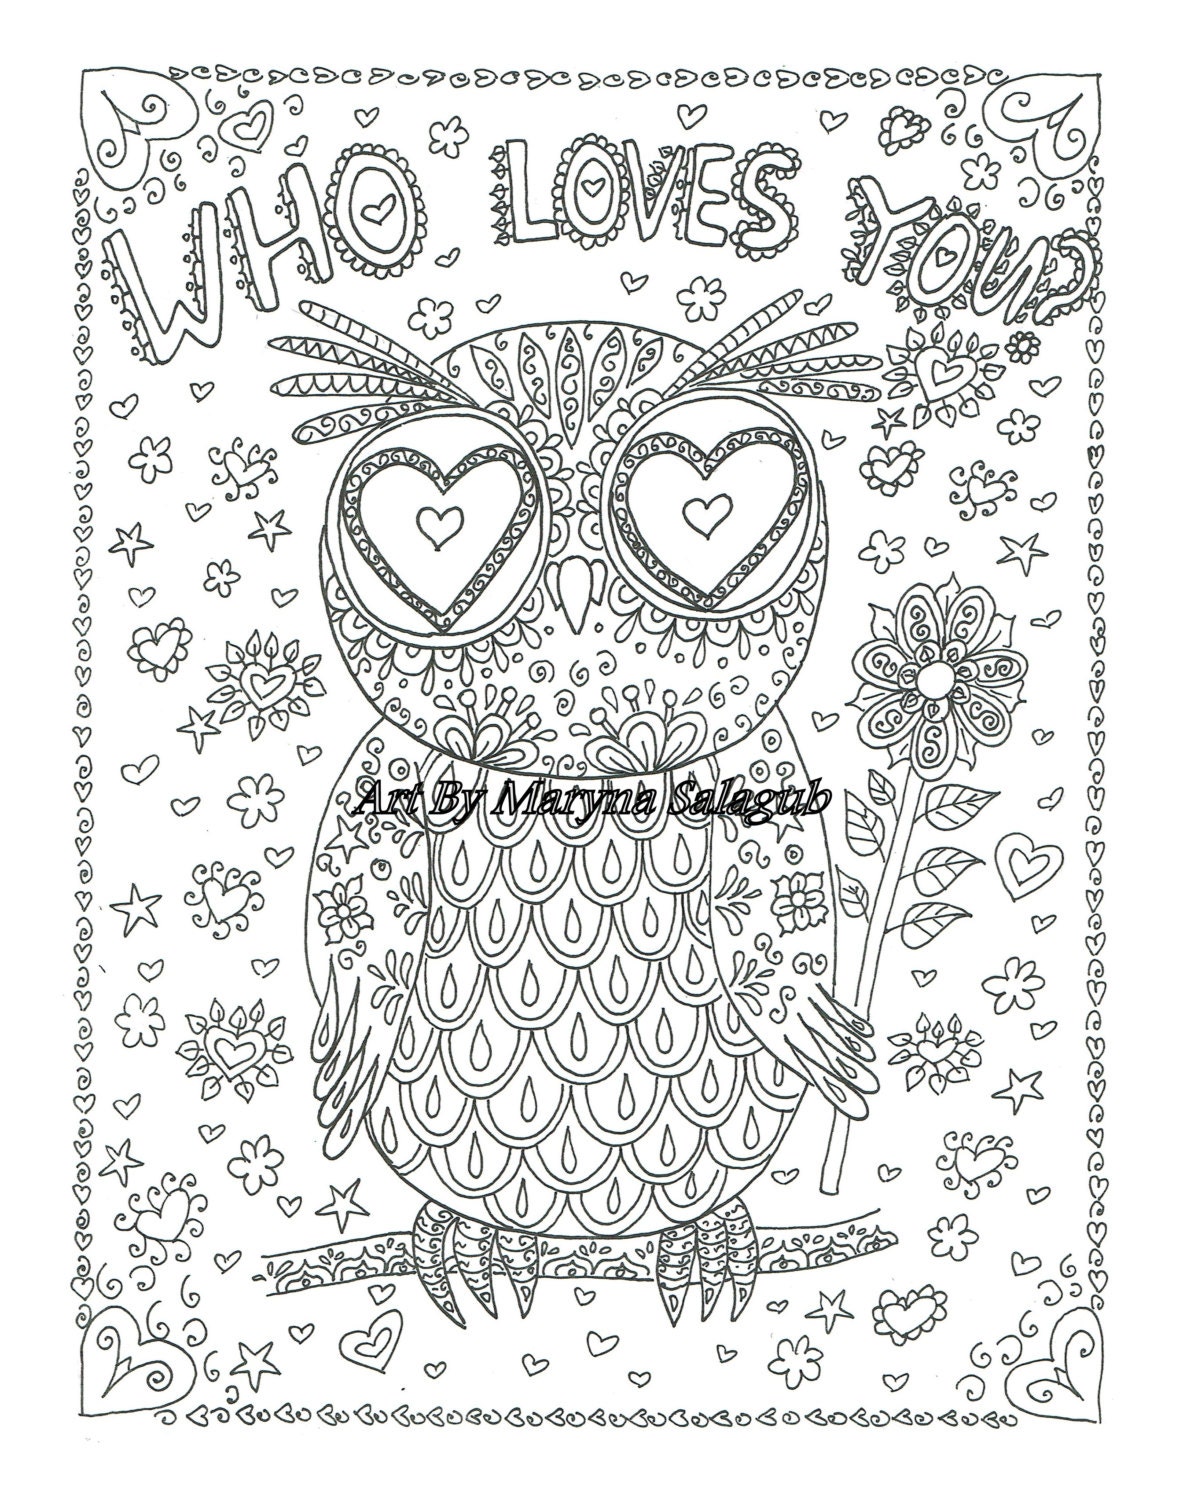 Coloring page who loves you owl love valentine's card